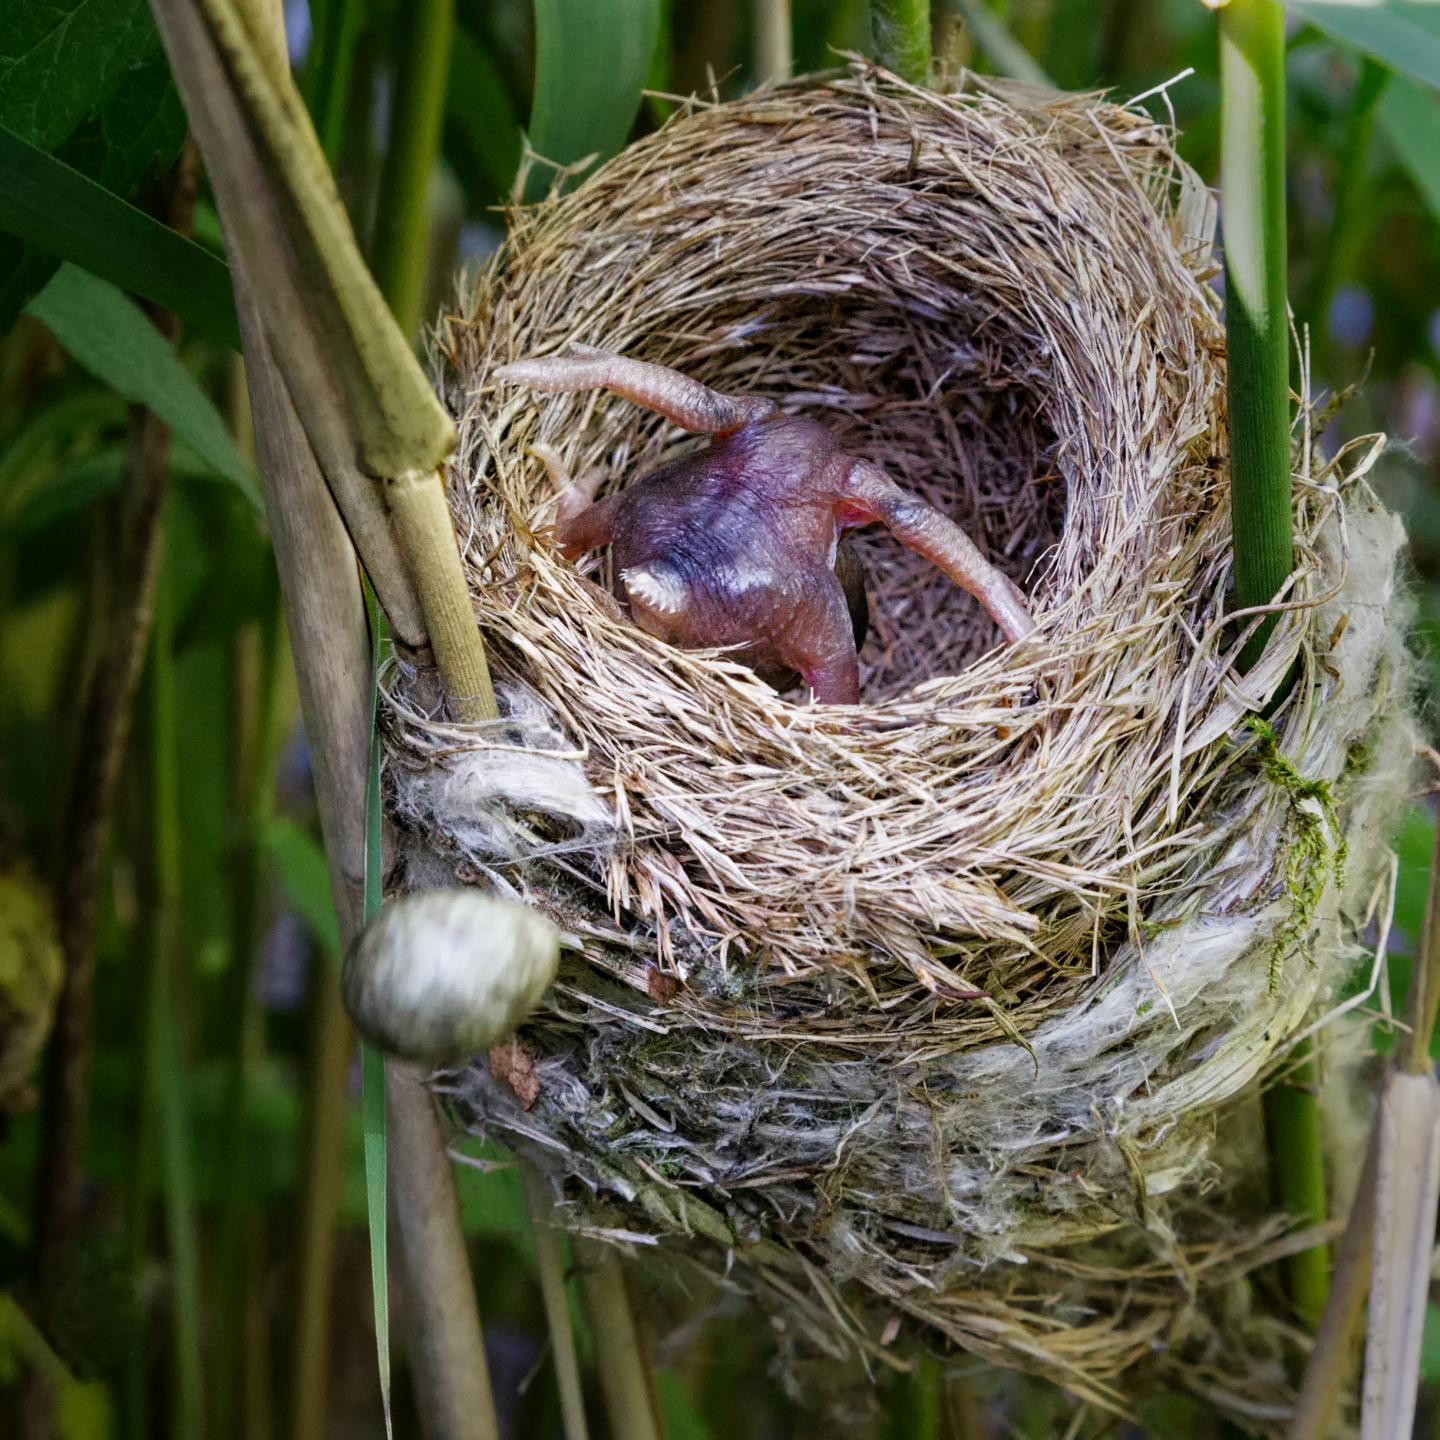 Cuckoo Chick Ejecting a Reed Warbler Egg from a Warbler Nest